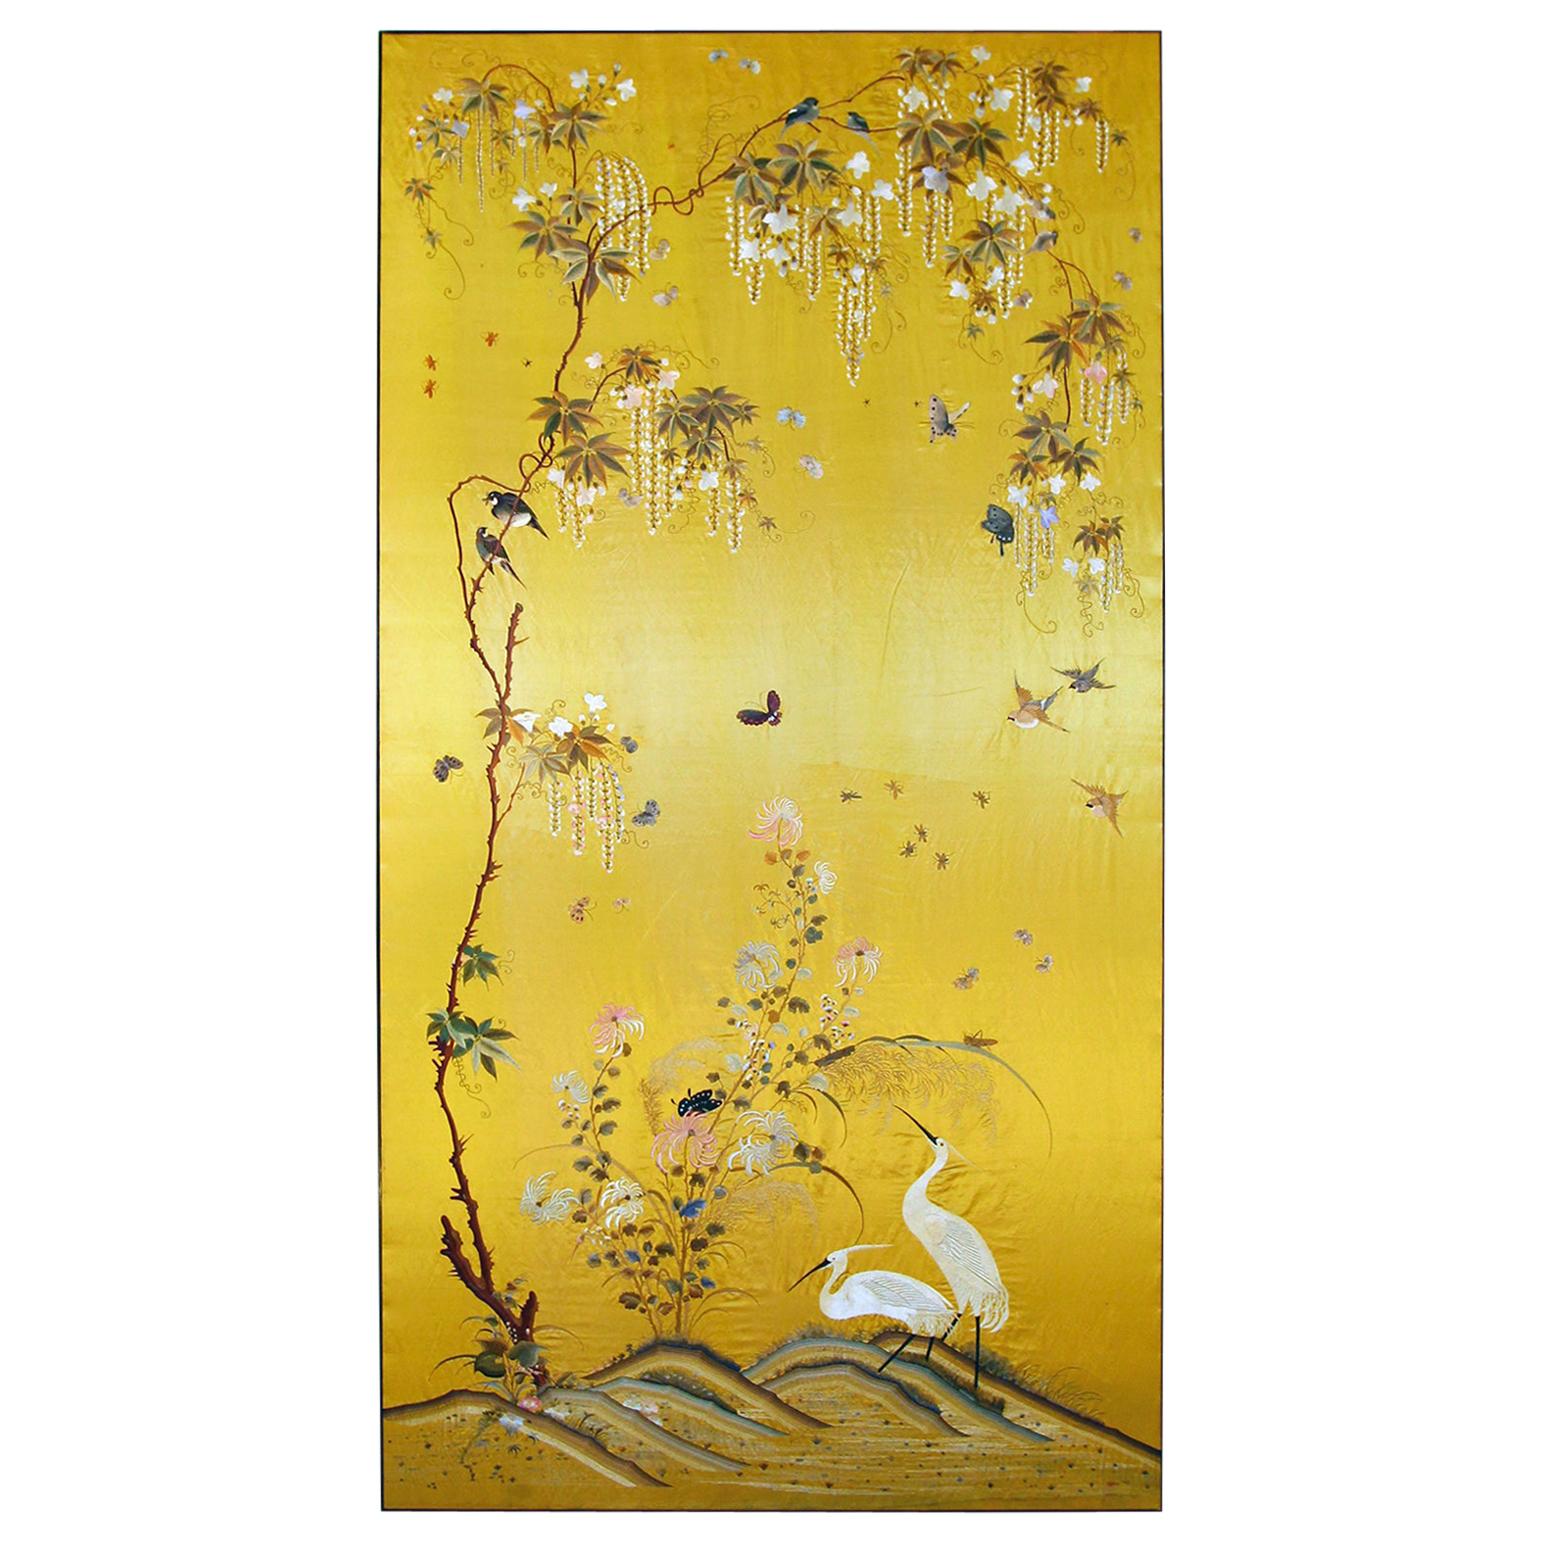 20th Century Silk Embroidered Herons under a Blooming Wisteria of Butterflies